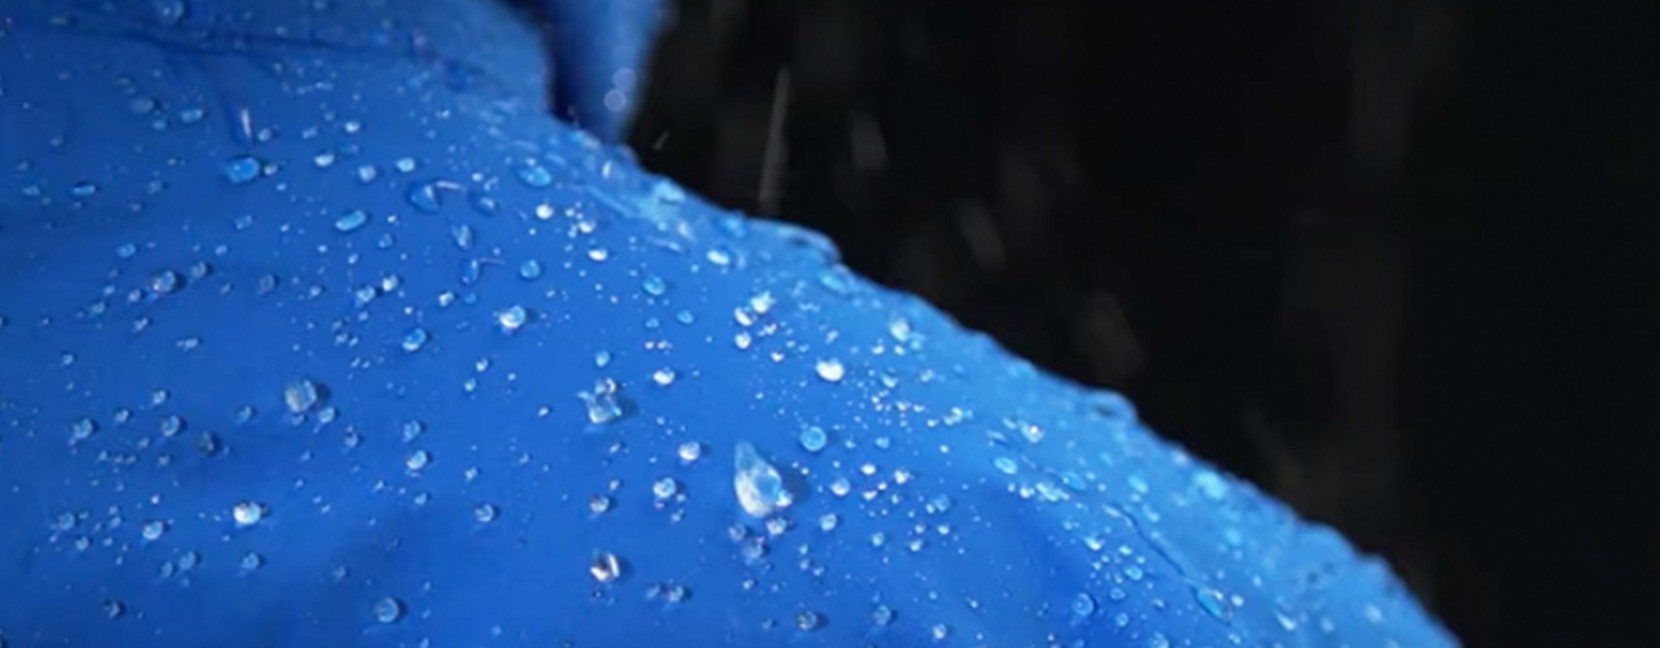 The shoulder of a waterproof jacket with water droplets beading on it.